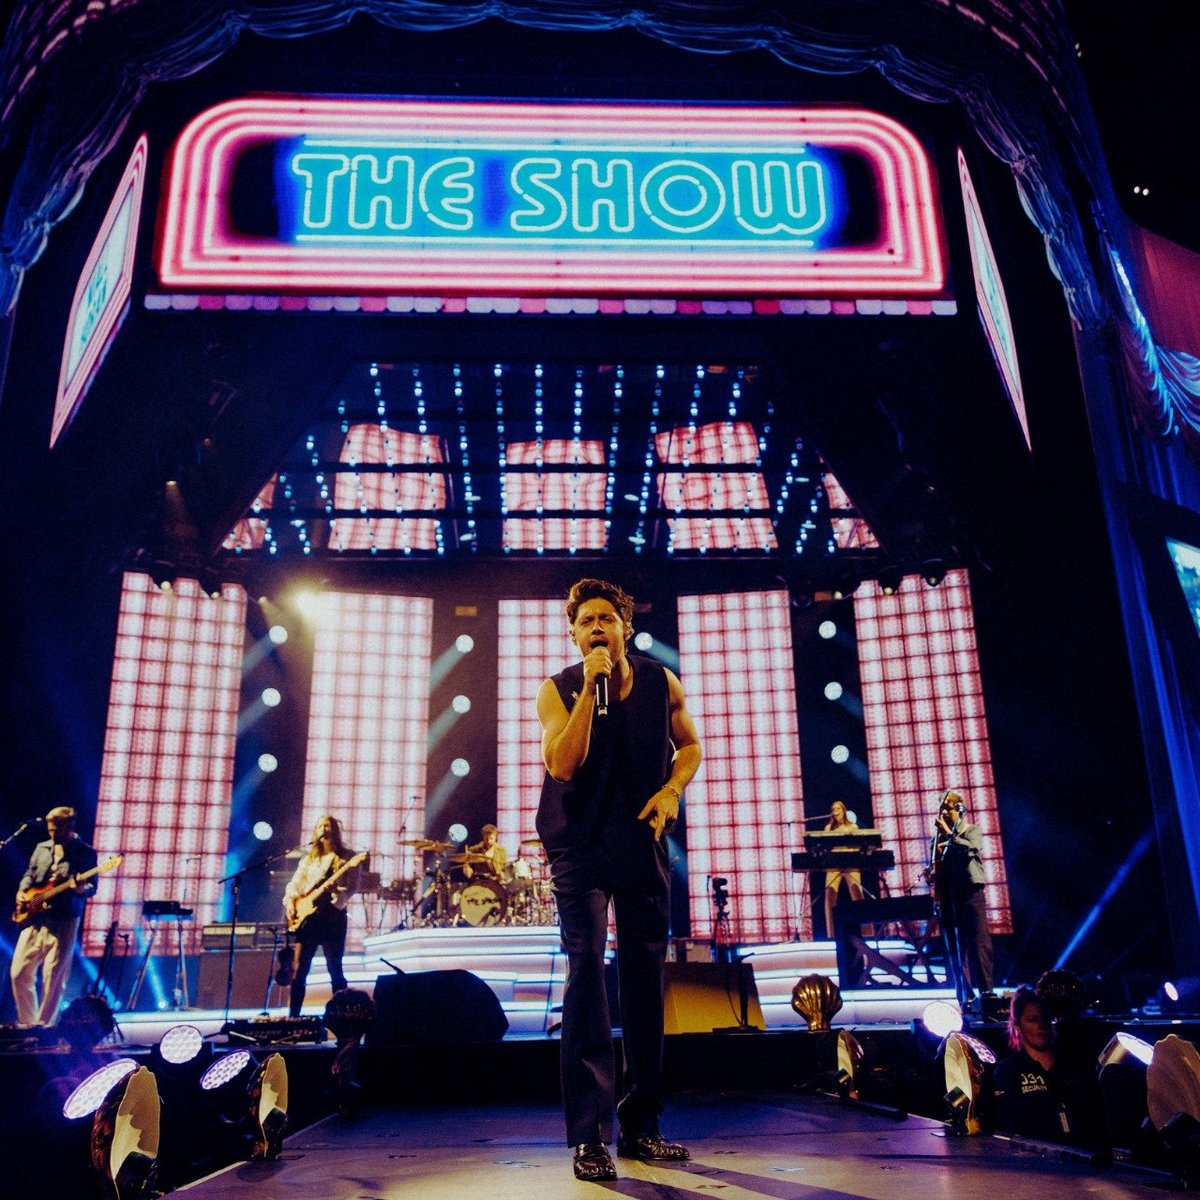 J&C Joel were delighted to be asked to supply the entire drape package for Niall Horan’s The Show tour, including a striking 22m wide x 12m drop Austrian curtain. In addition, we supported the production and creative teams throughout rehearsals with onsite tailoring.